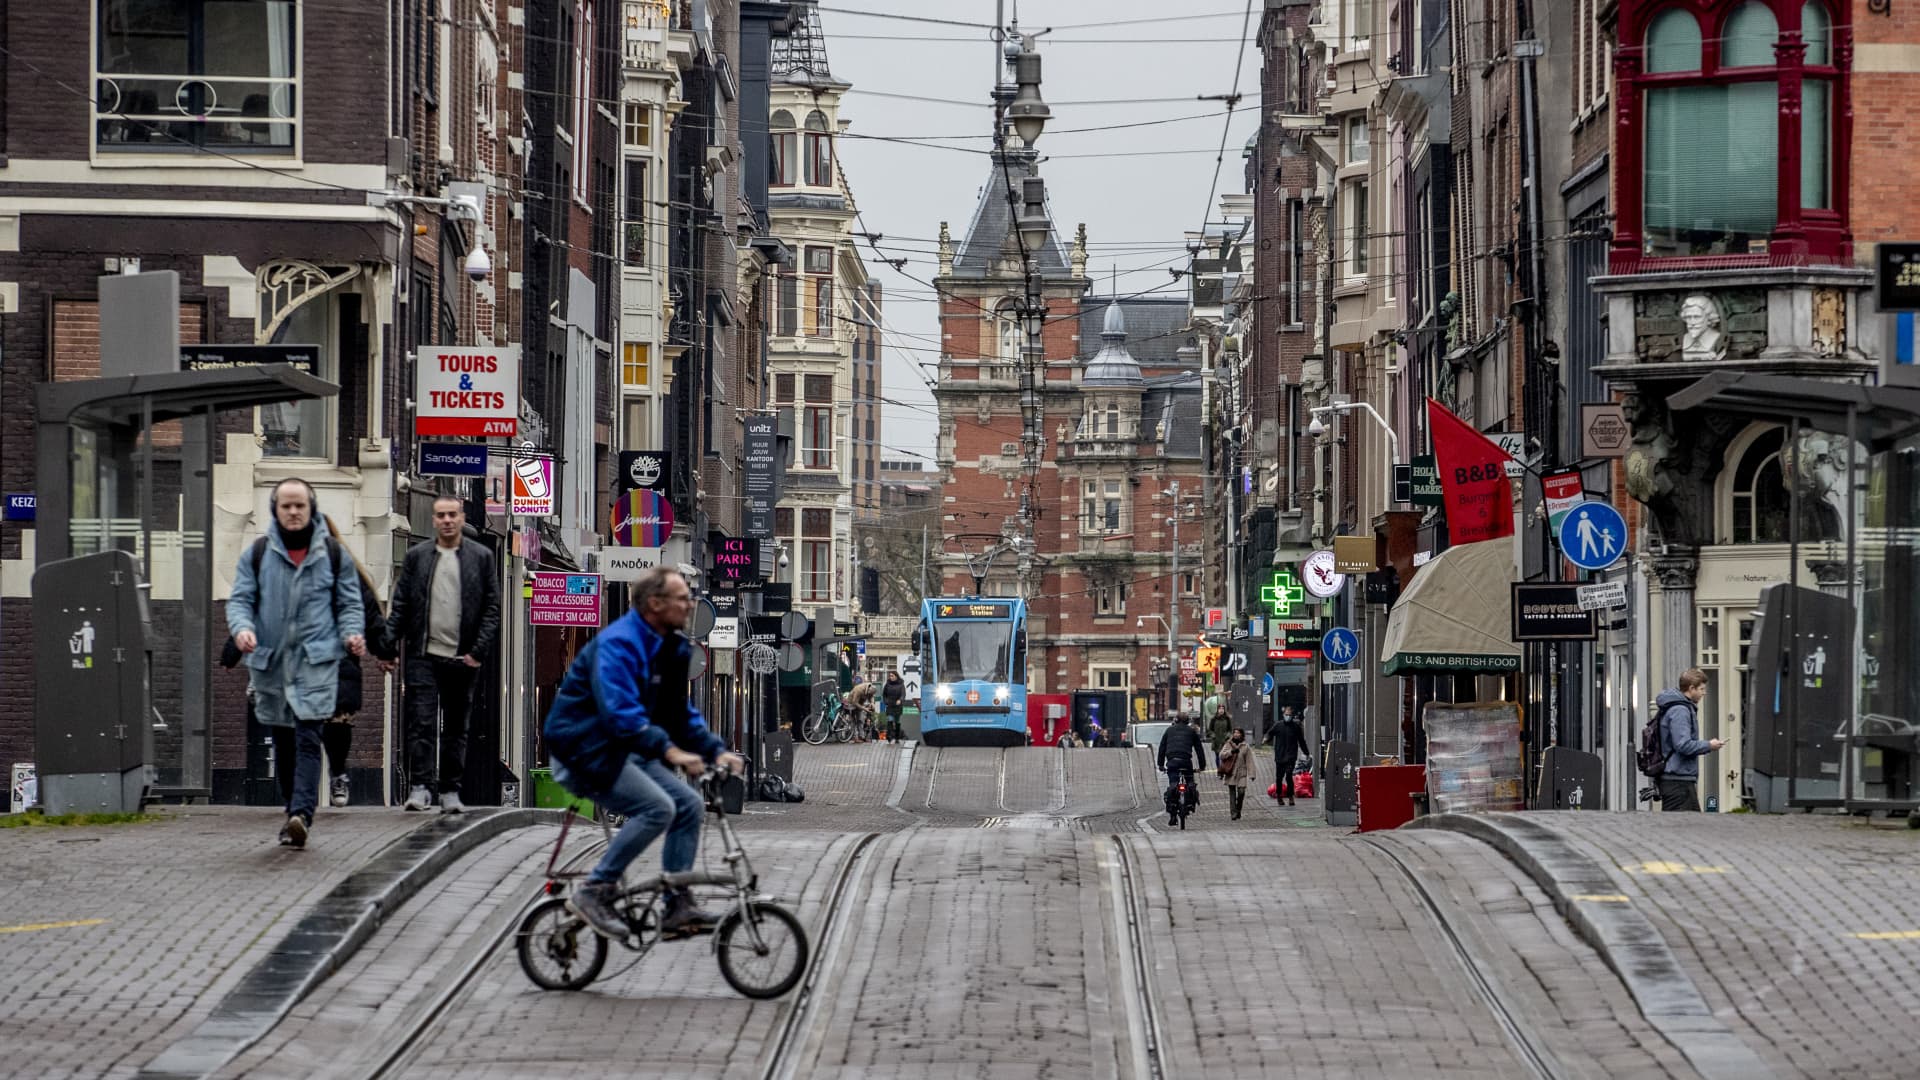 View of an almost deserted city center on December 15, 2020 in Amsterdam, Netherlands.